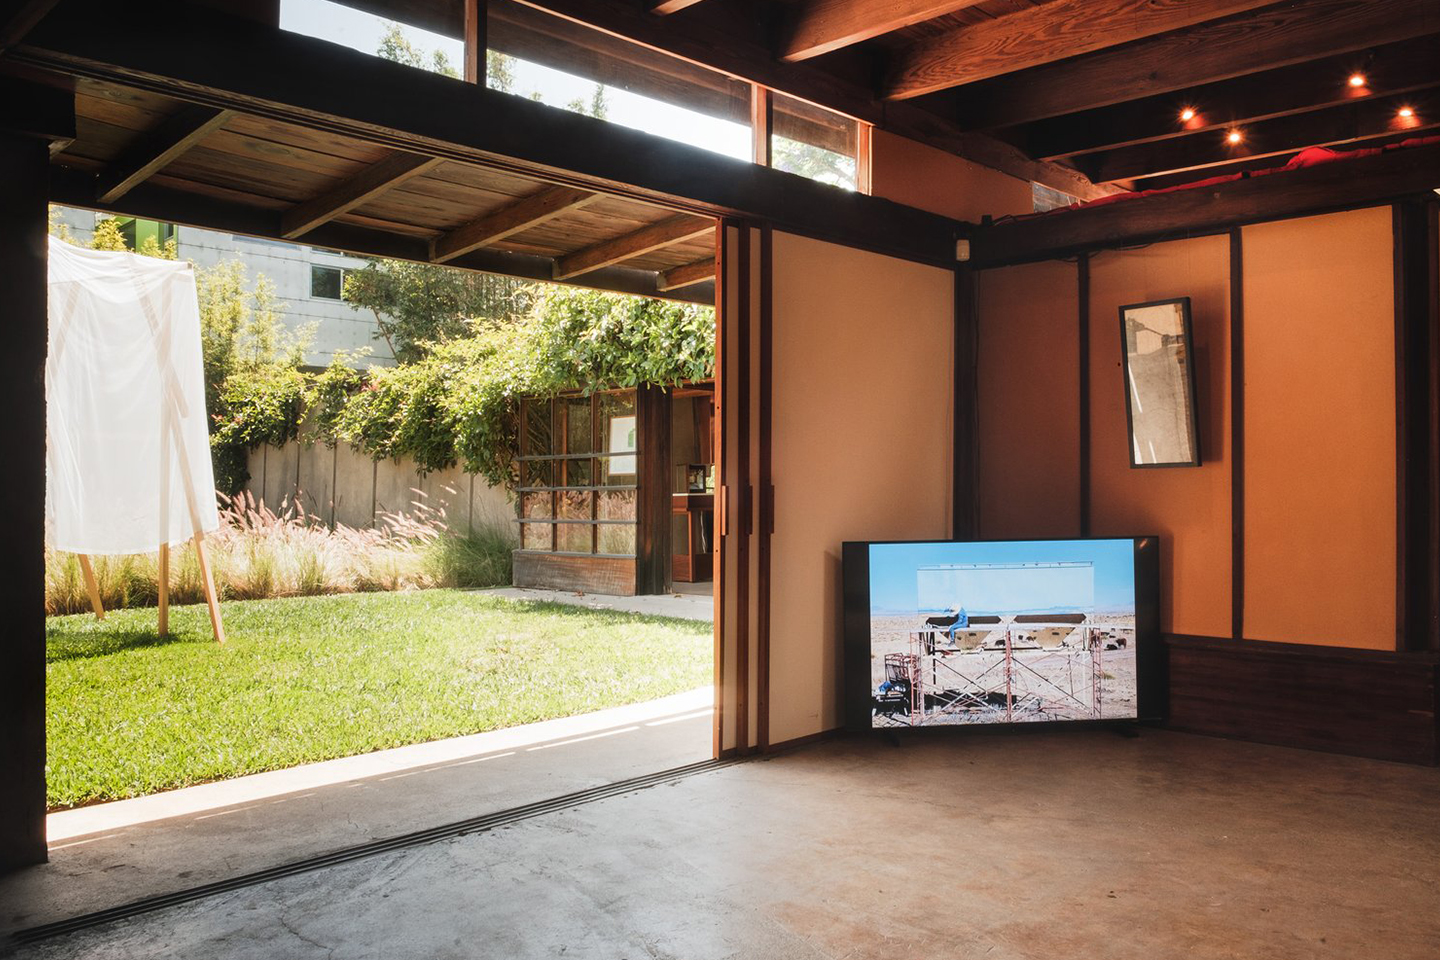 Schindler House: 100 Years in the Making exhibition at the MAK Center for Art and Architecture Los Angeles